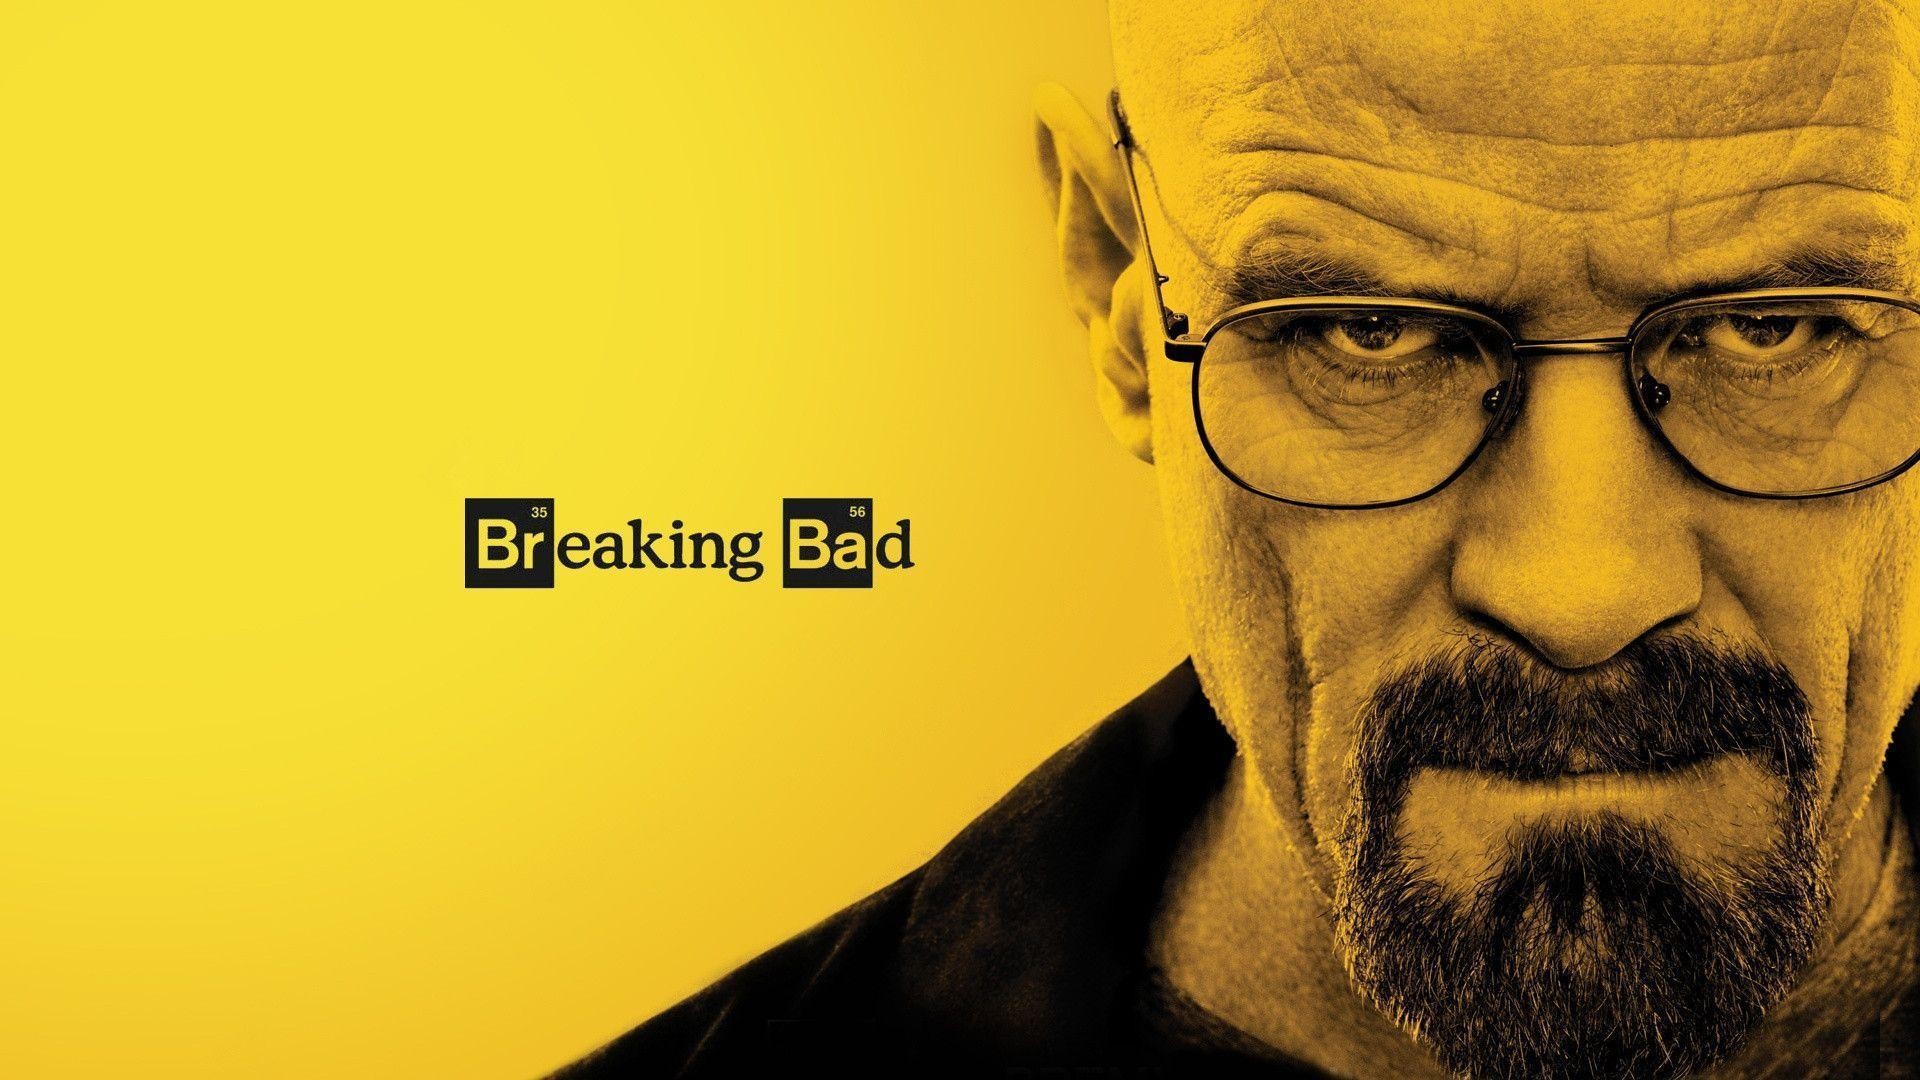 Heres a cool Breaking Bad wallpaper I found  rbreakingbad